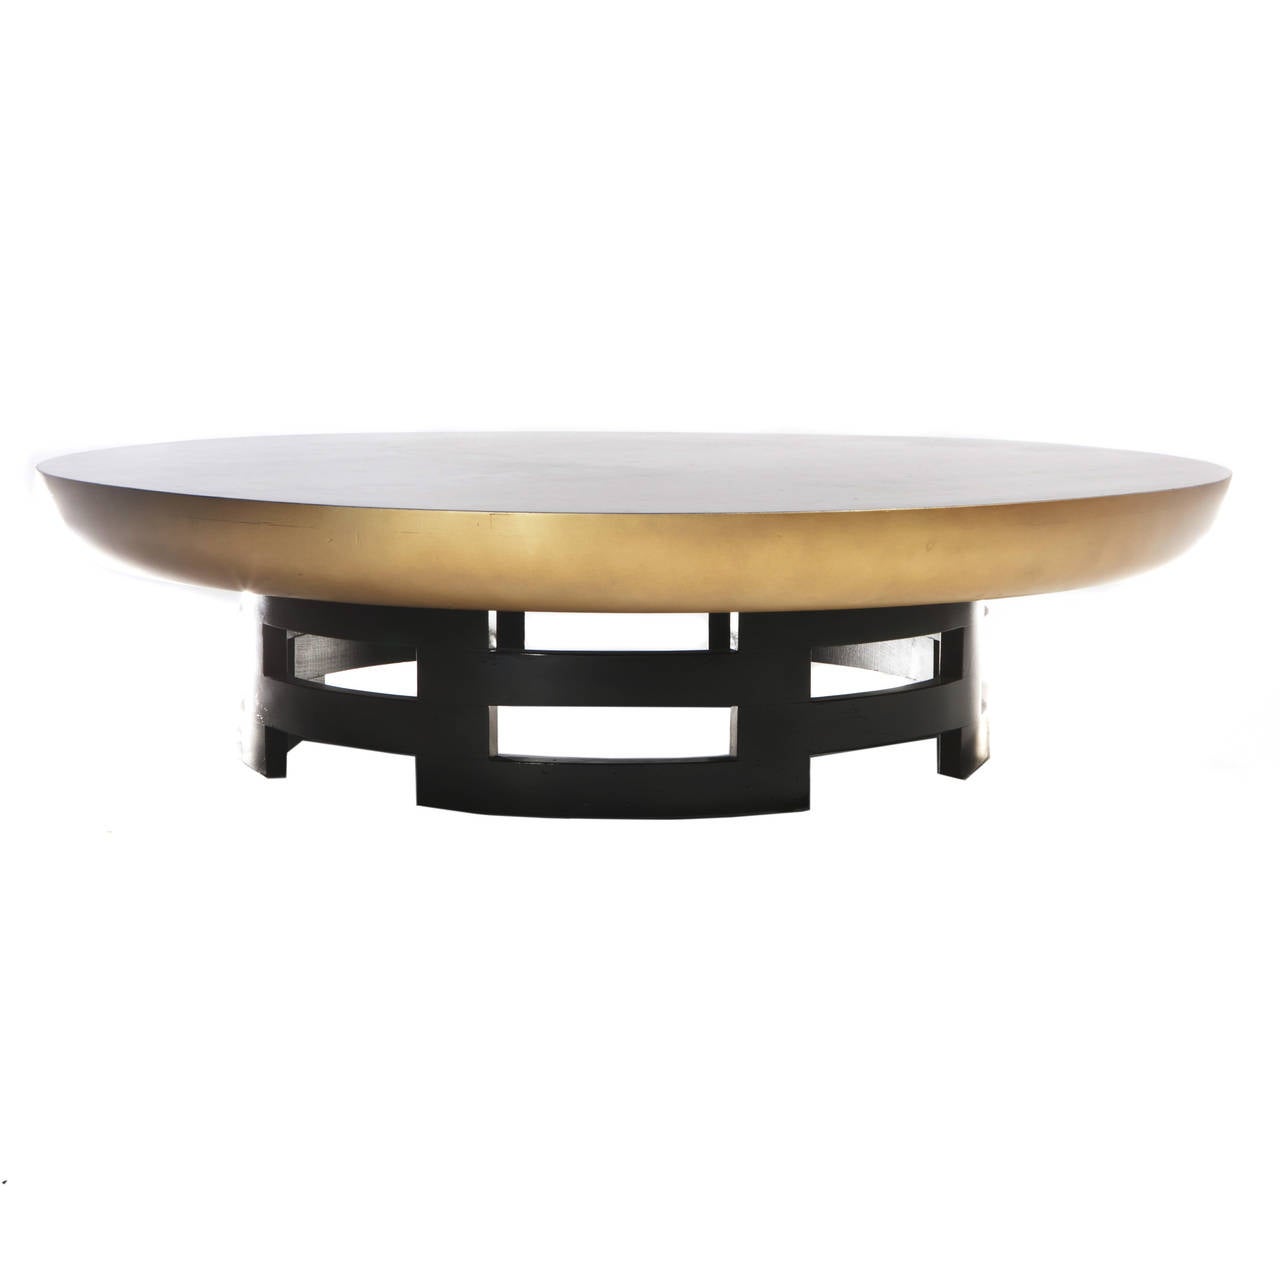 The lacquered top features a deep beveled gilt edge and a brown-and-gold oil-drop finish in the shape of a flower. It rests on an interlocking, geometric, ebonized-wood base. Theodore Muller and Isabelle Barringer for Kittinger, USA, circa 1950s.